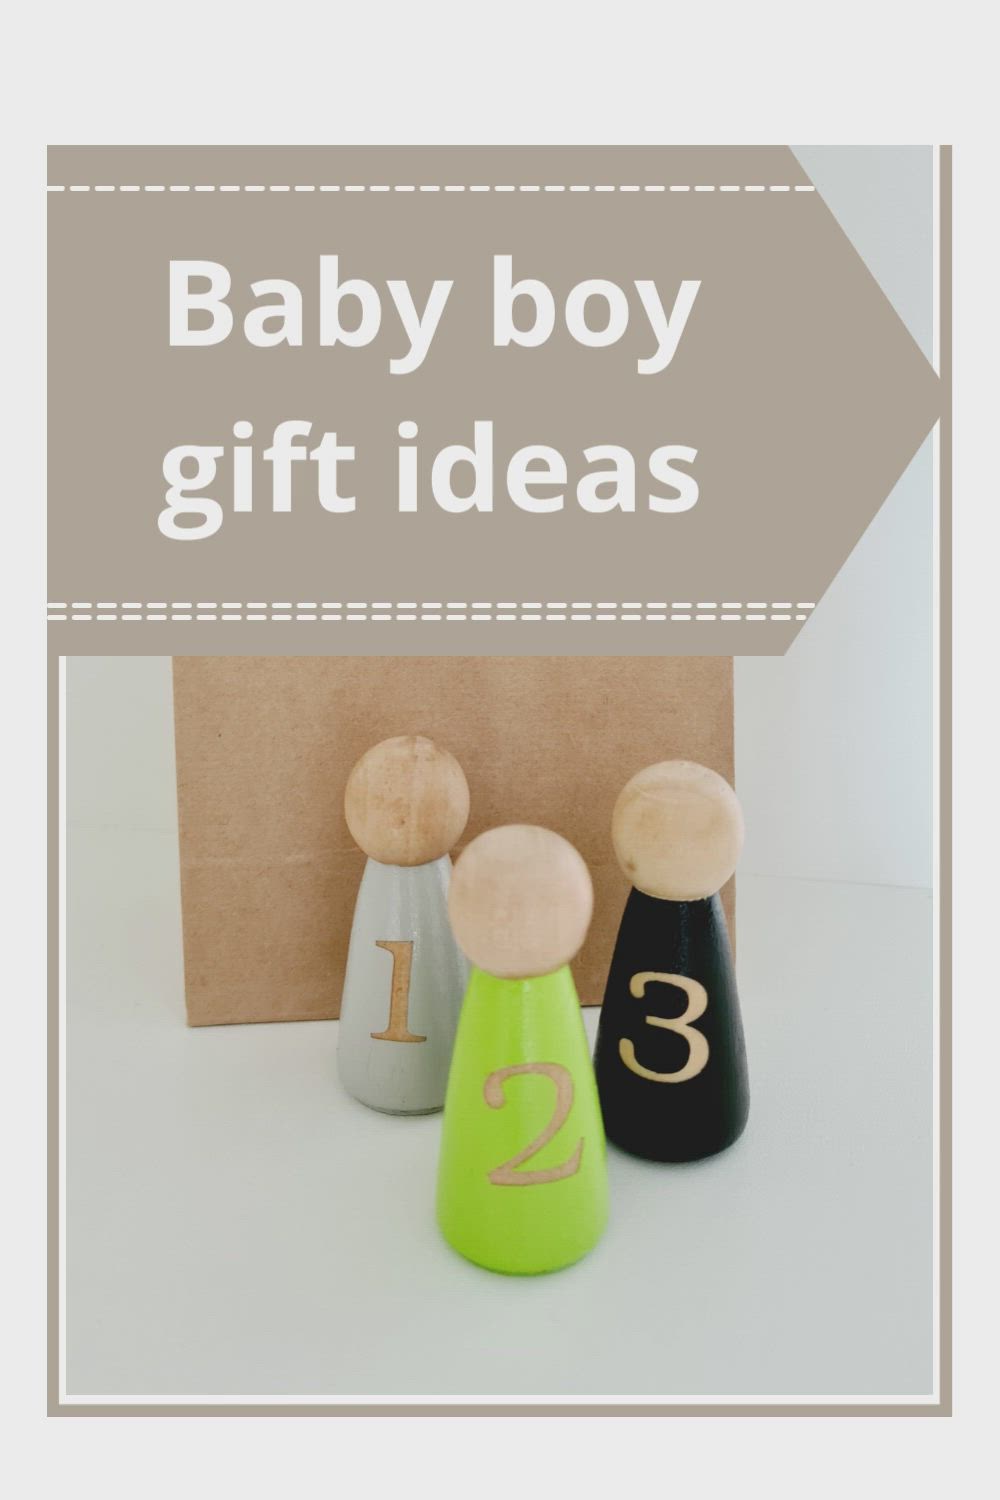 This may contain: baby boy gift ideas for the first year in their life and it's so cute